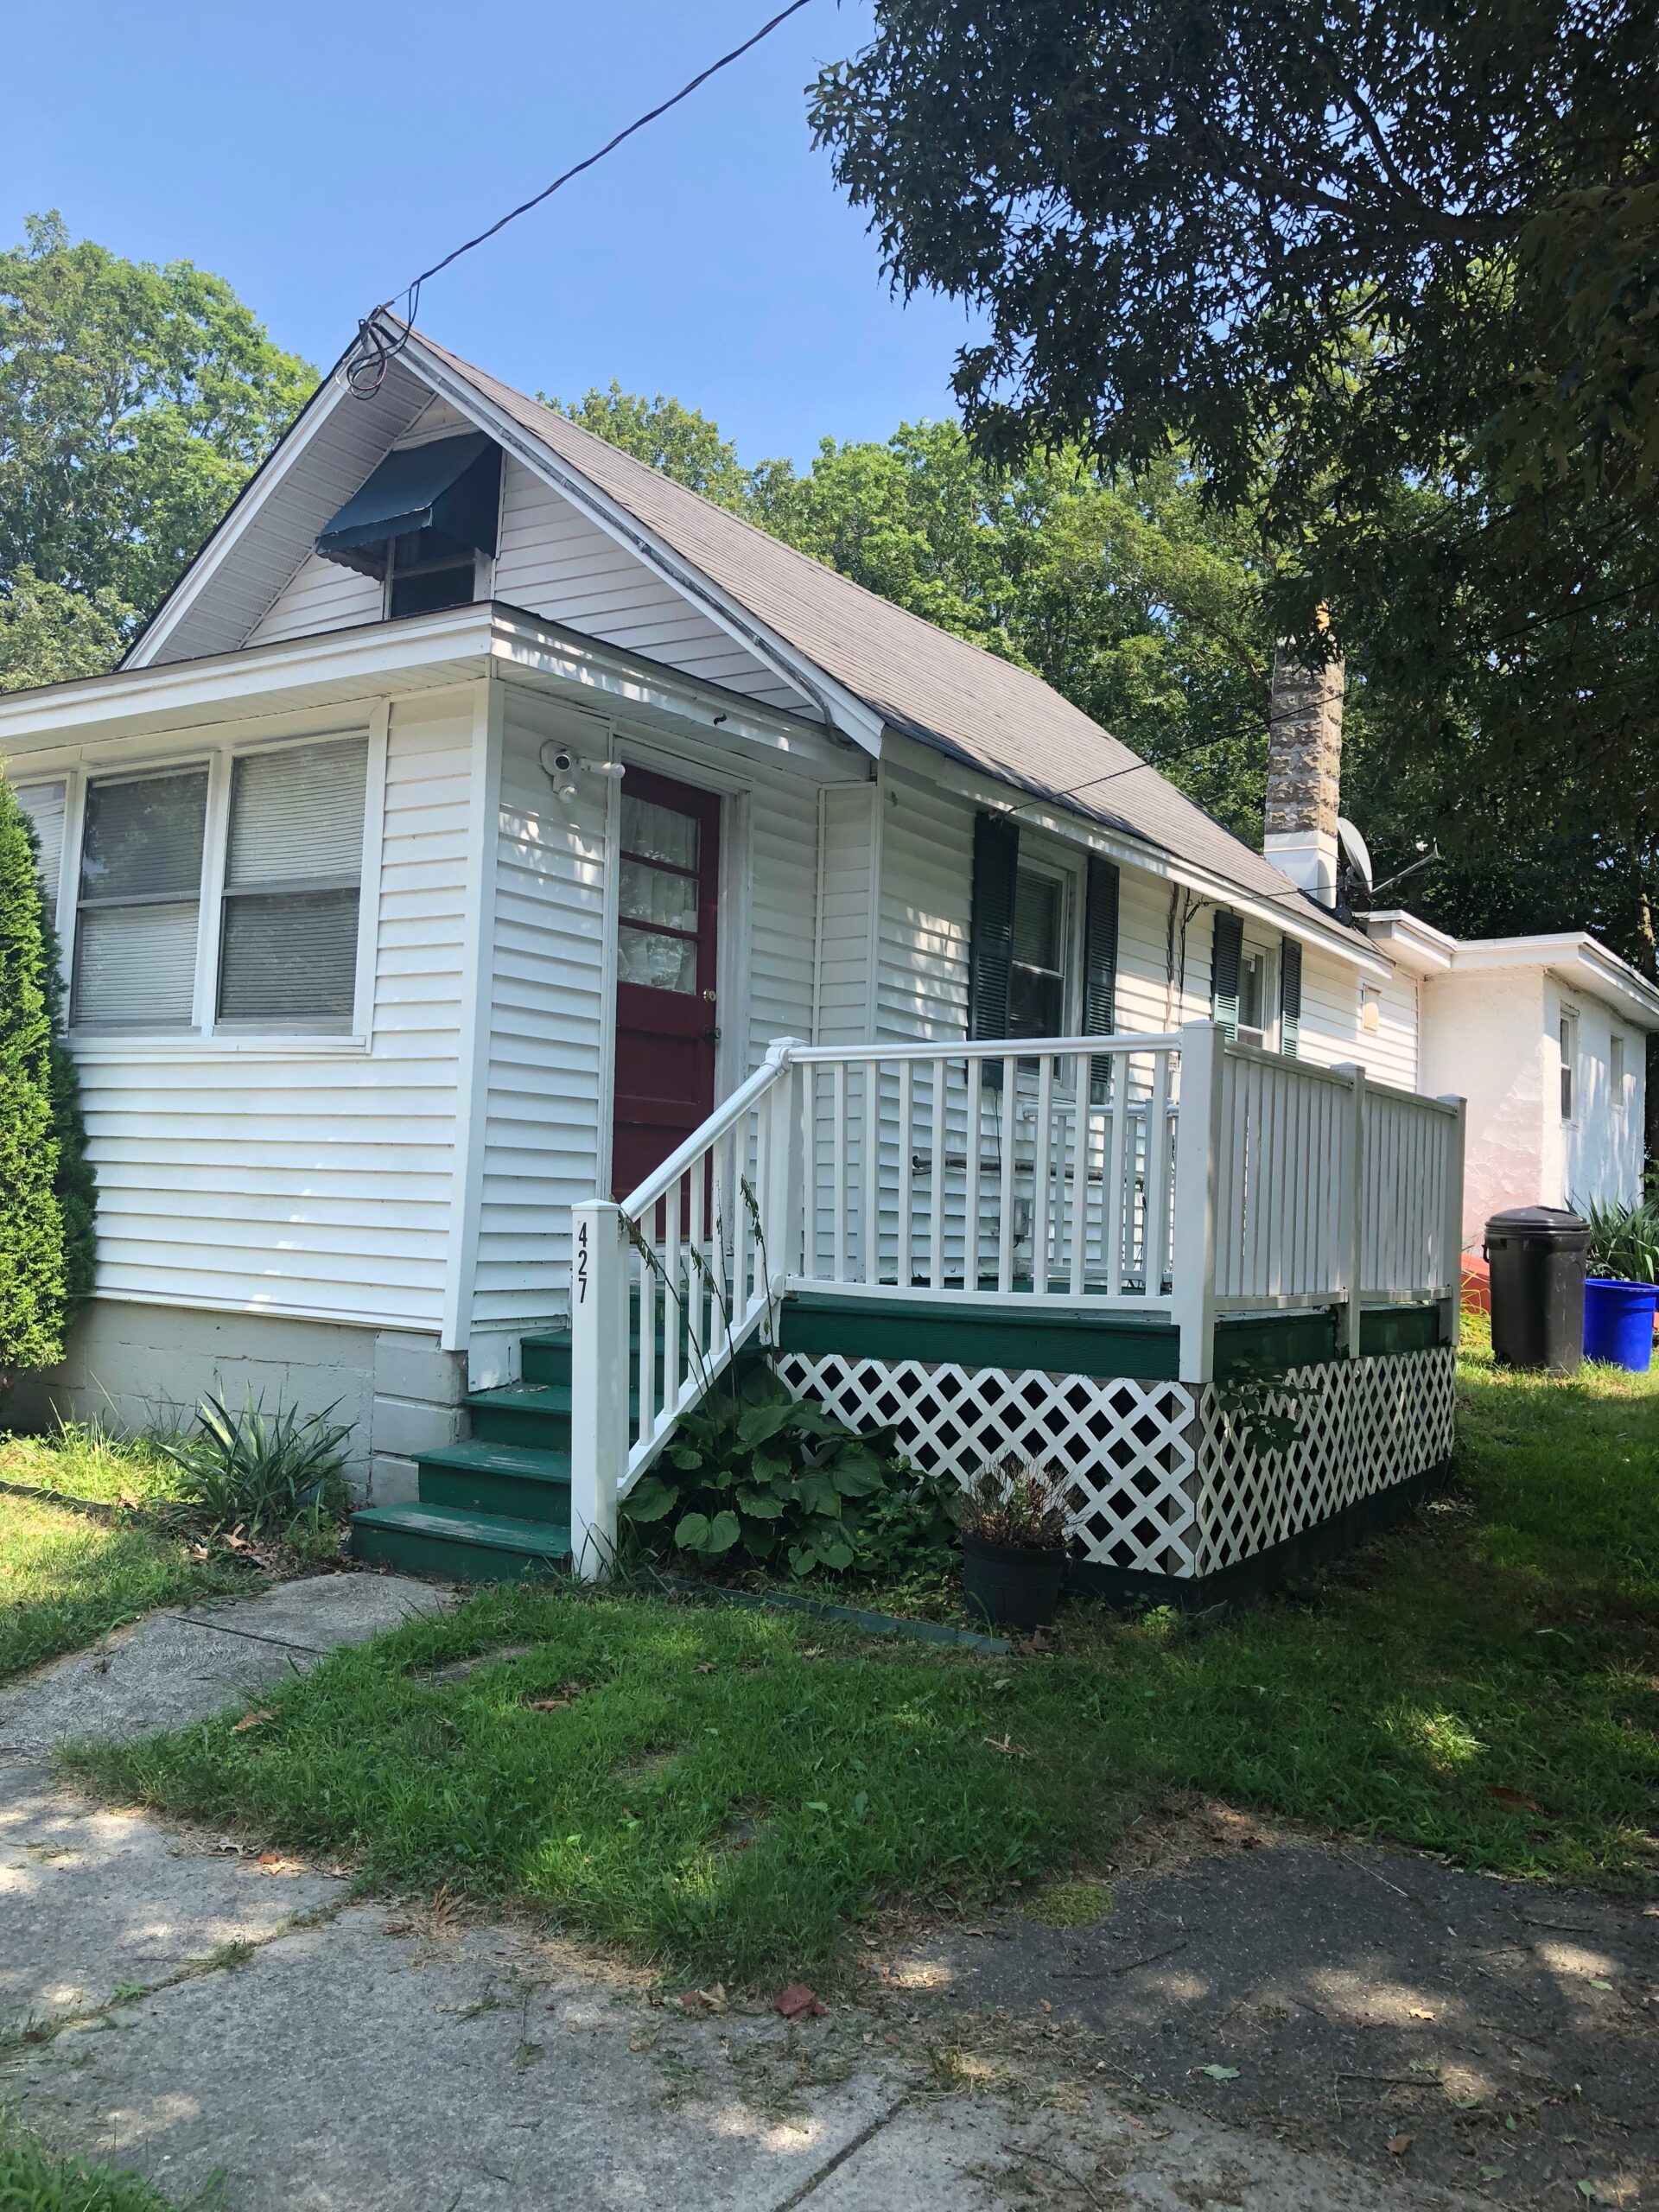 2 Bed 1 Bath Rental in Somers Point